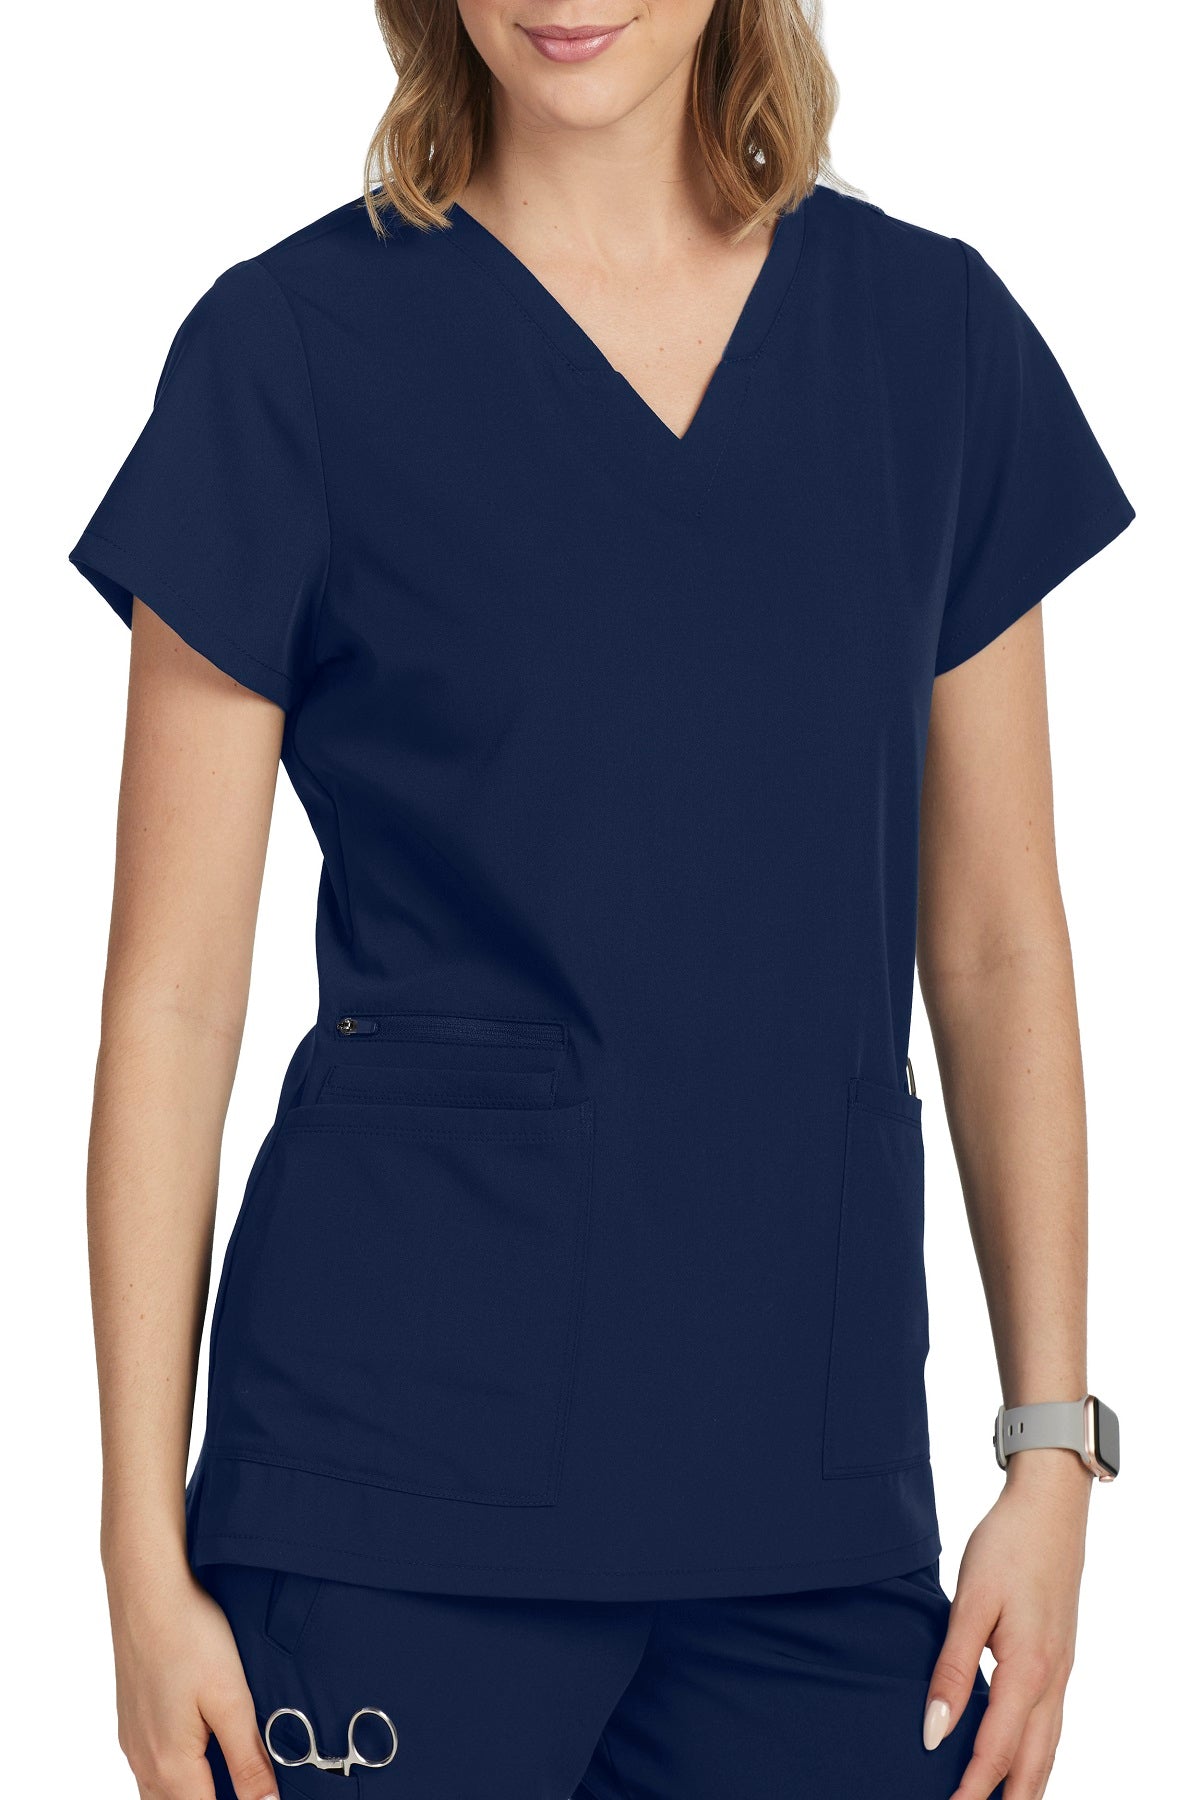 Barco Unify Scrub Top Purpose V-Neck in Indigo at Parker's Clothing and Shoes.